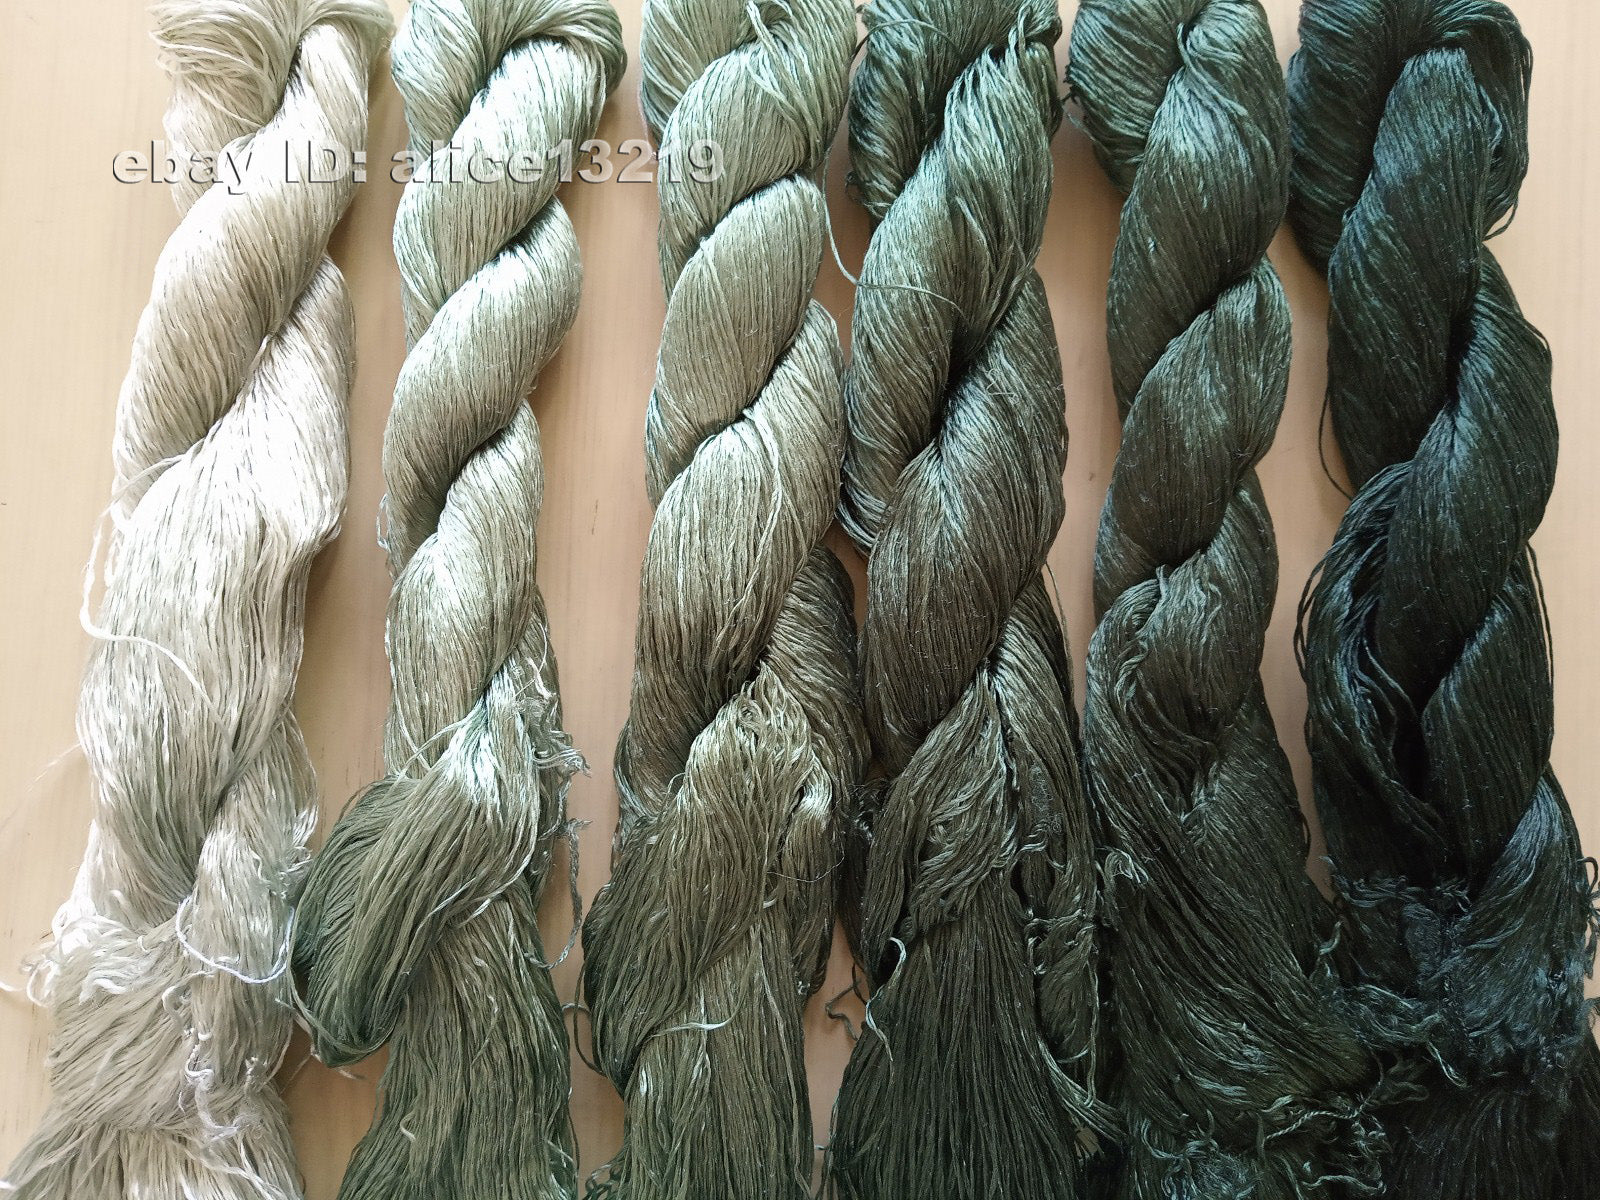 6bundles 100%real mulberry silk,hand-dyed embroidery silk floss/thread N40